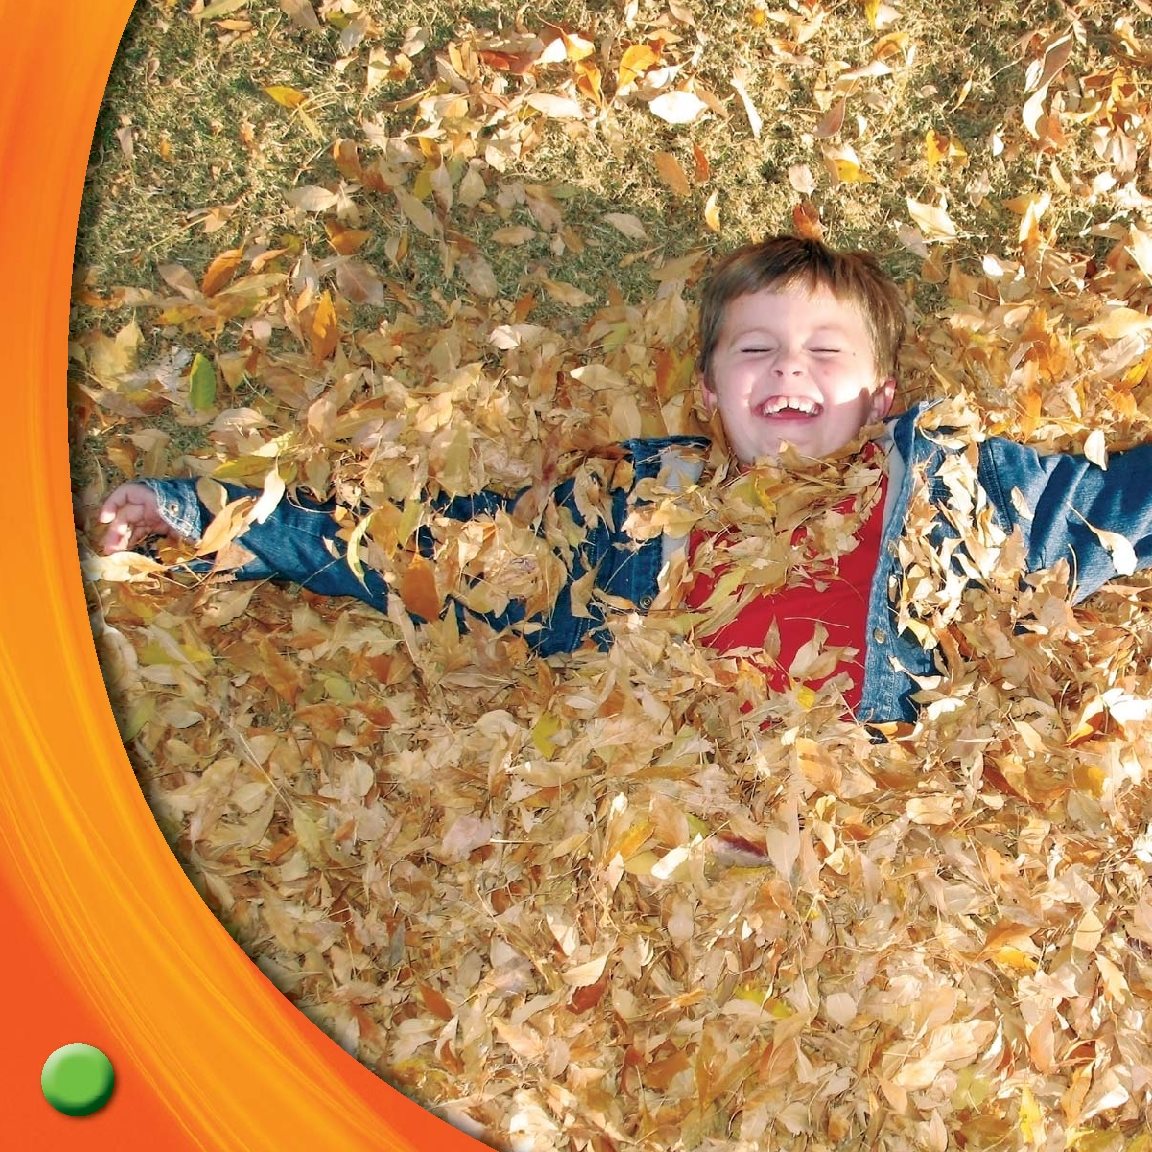 Leaves fall People rake them into piles Ben plays in fallen leaves - photo 11